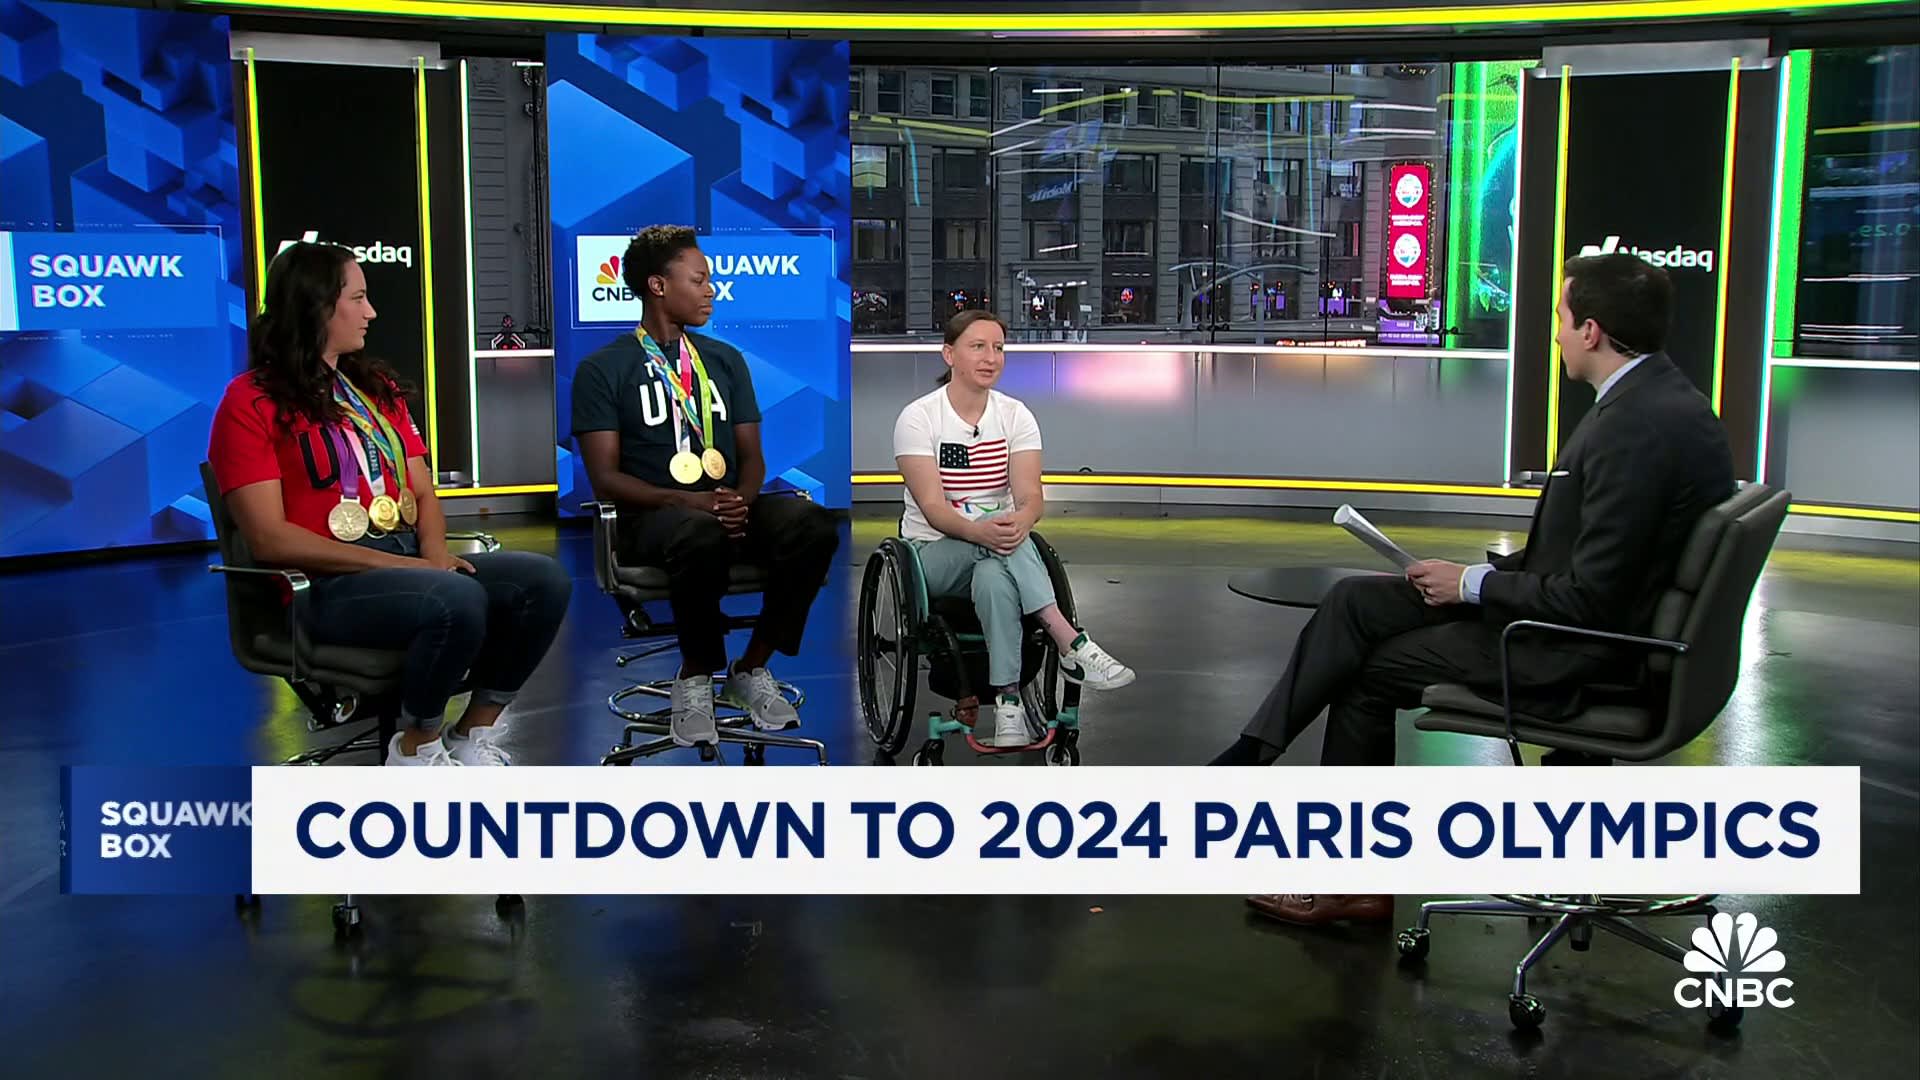 Going for gold: Countdown to 2024 Paris Olympics